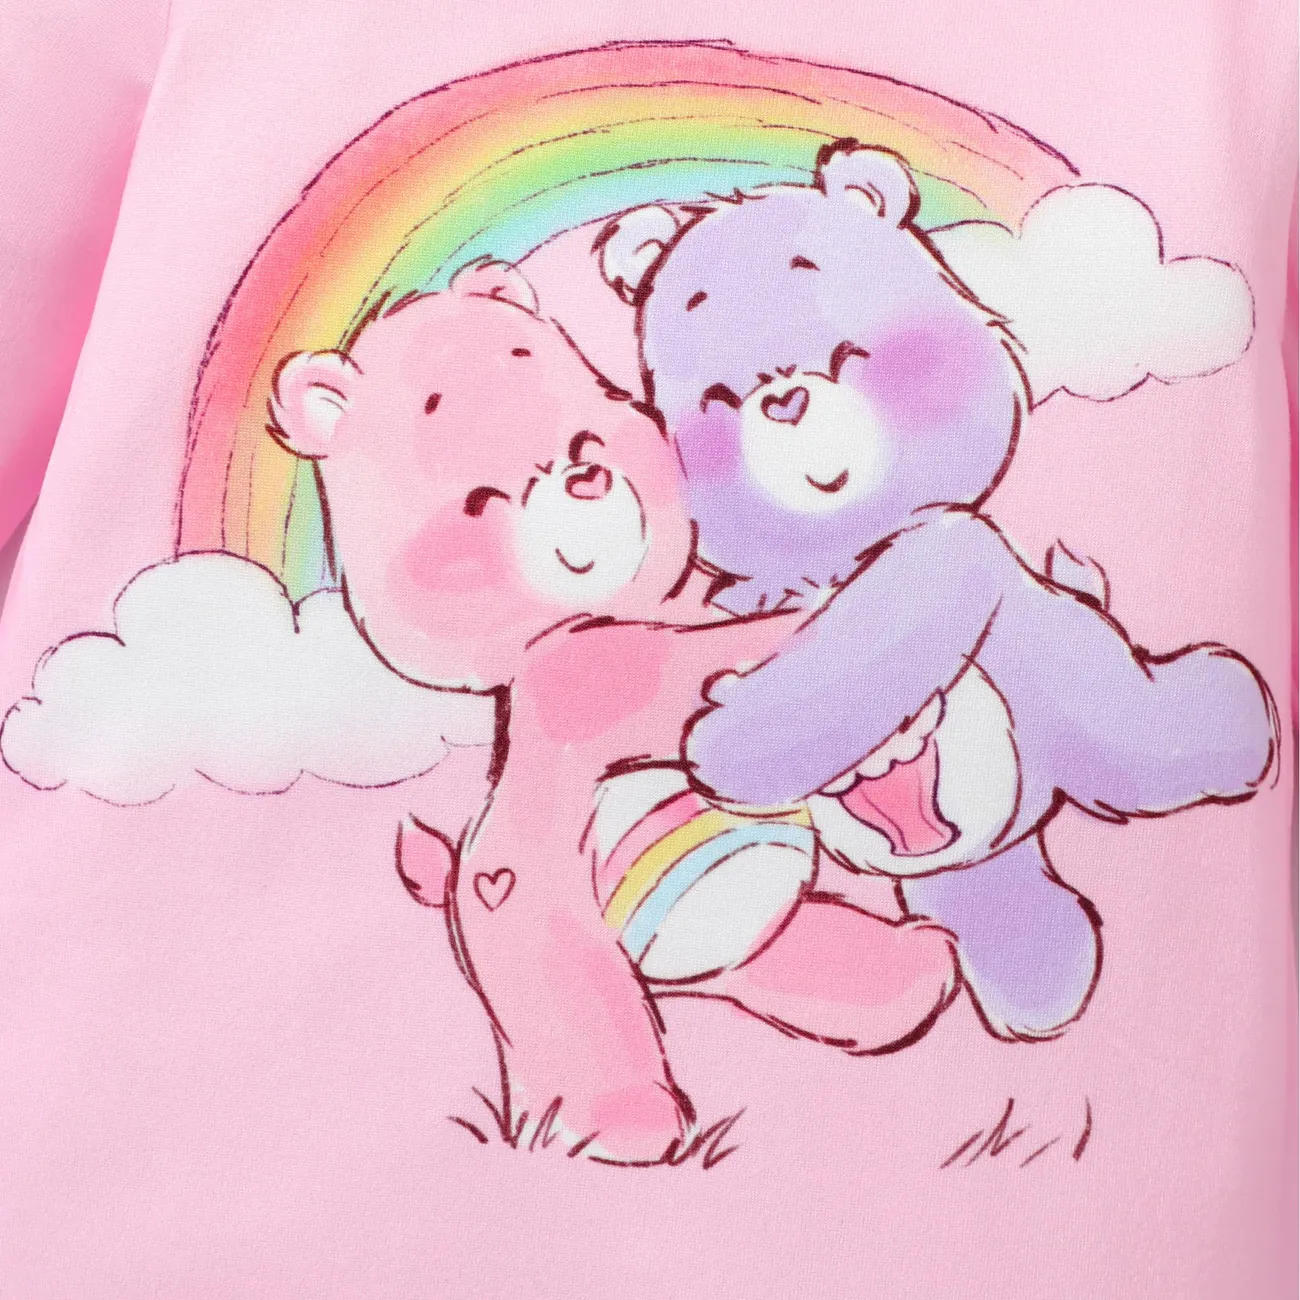 Care Bears Baby Boy/Girl Romper/One Piece
 Pink big image 1